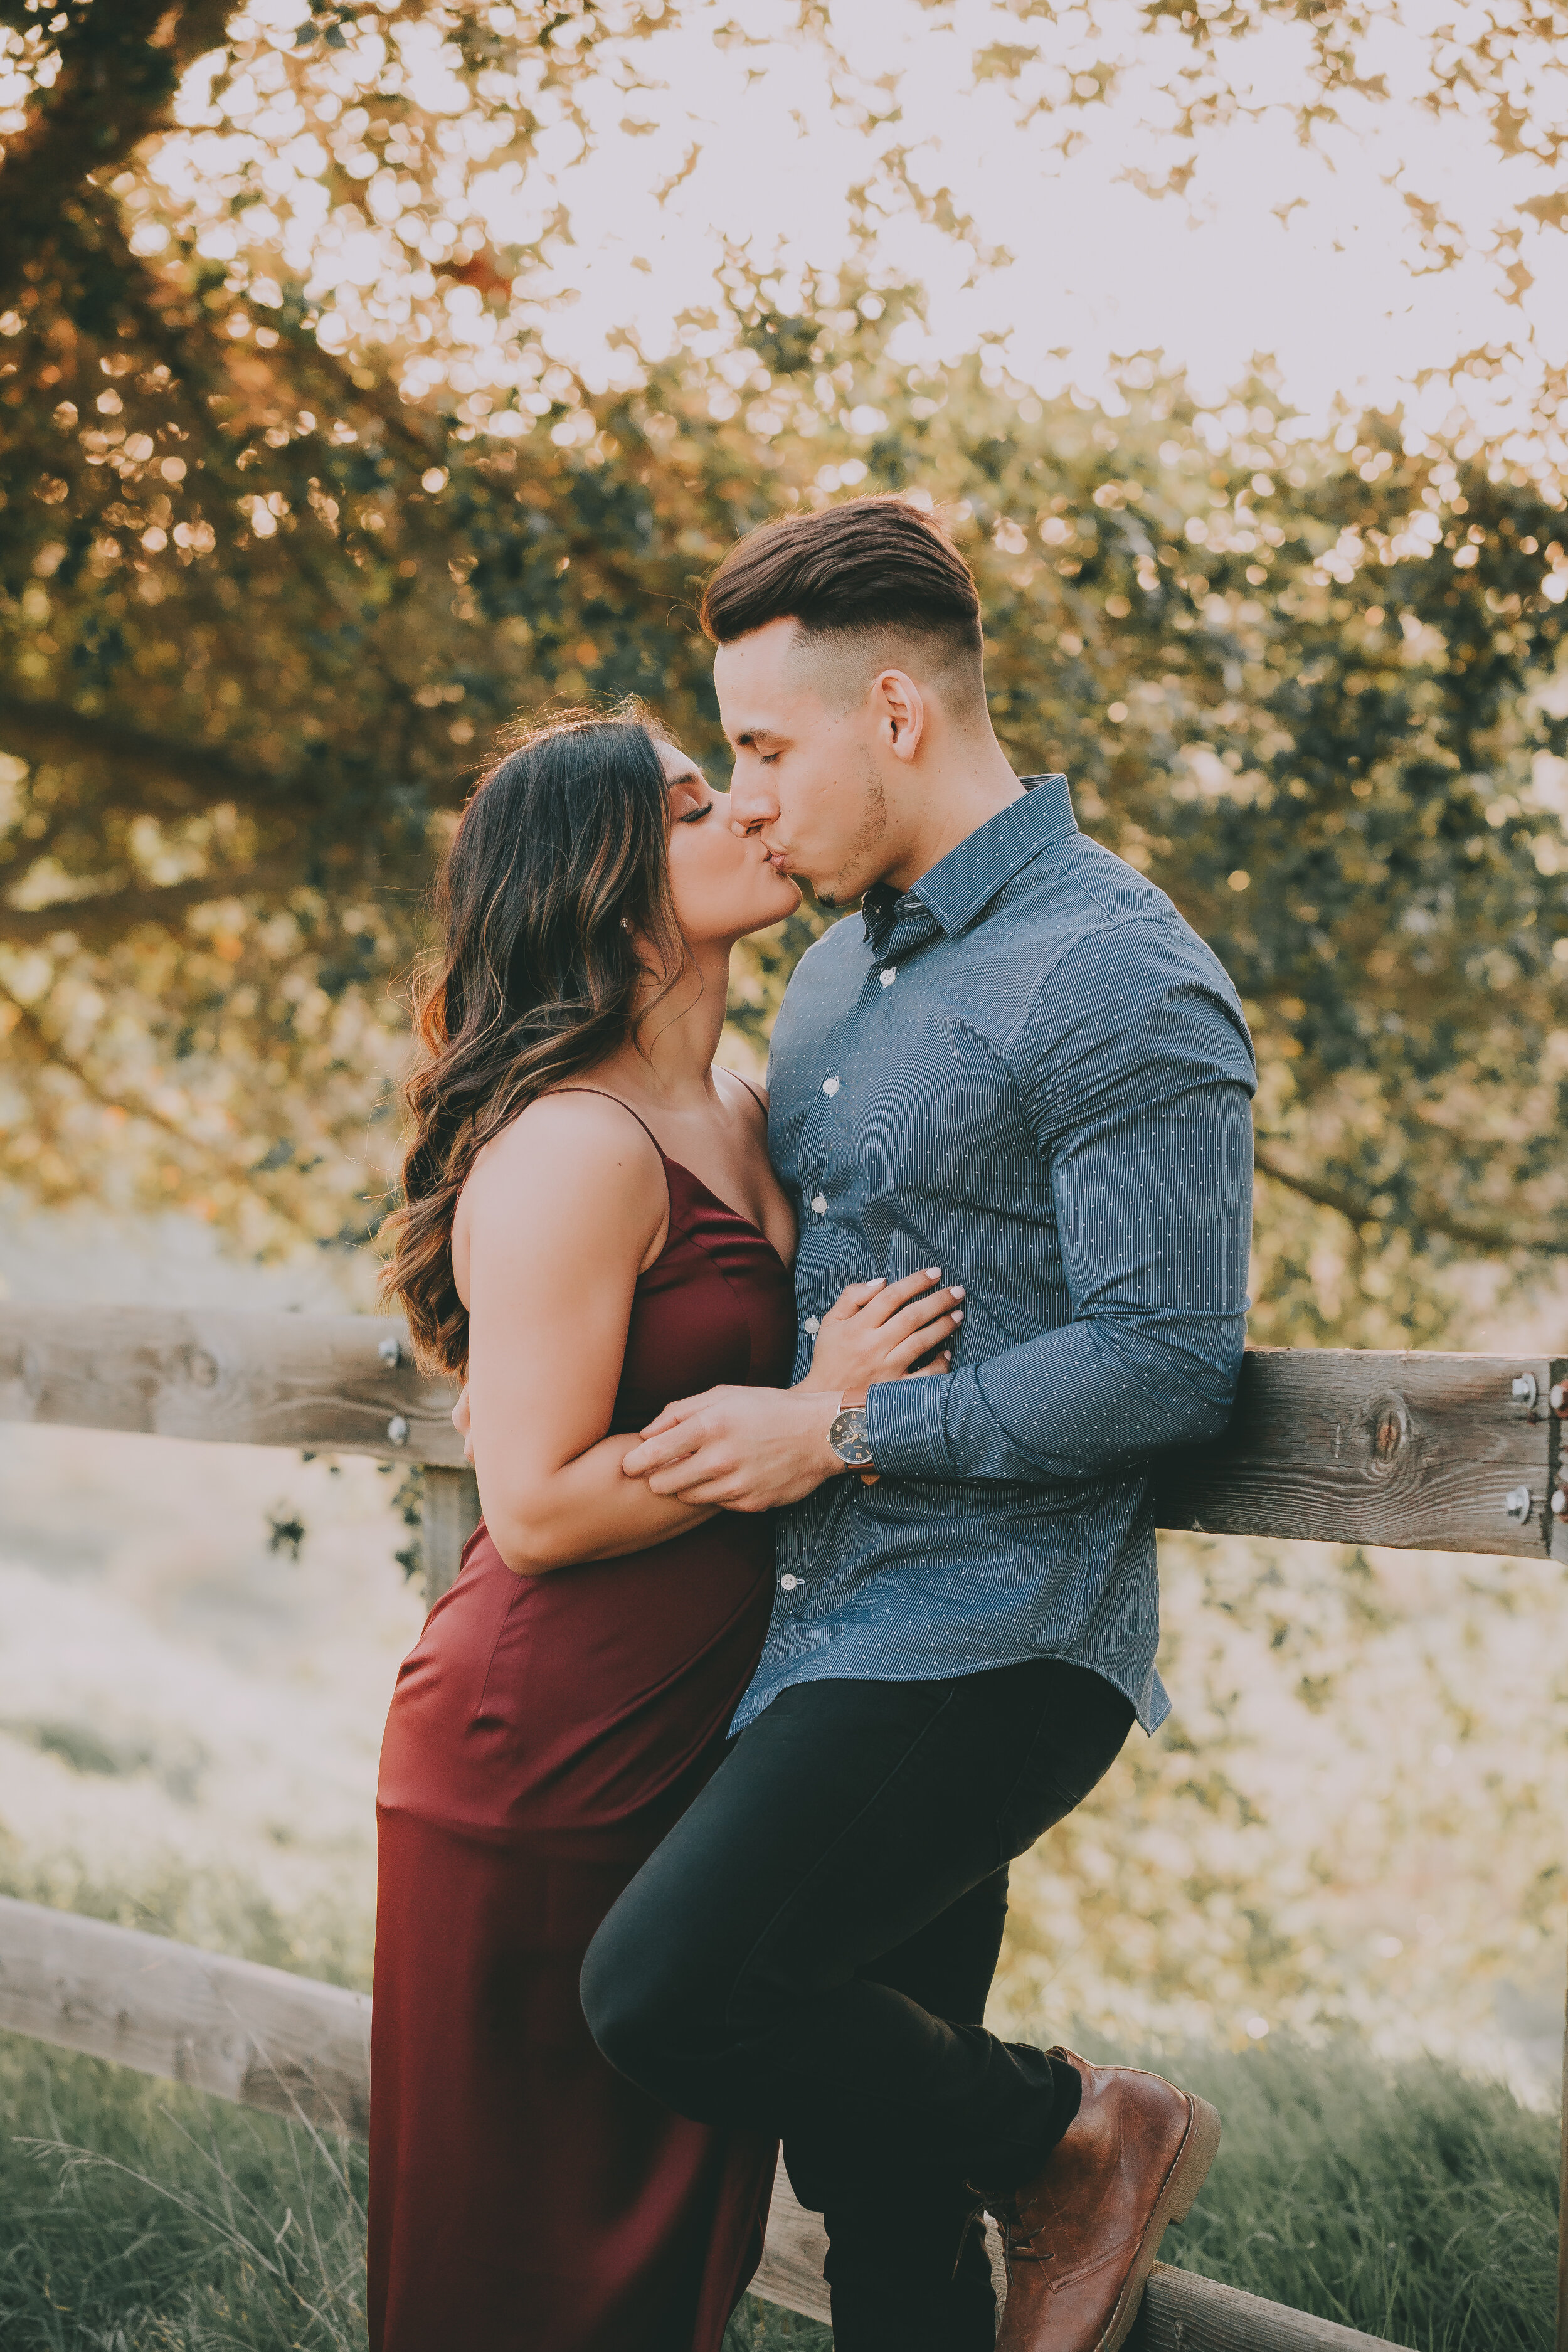 Fresno Engagament Photos - The Clausen Gallery - Samantha and Jesus-19.jpg